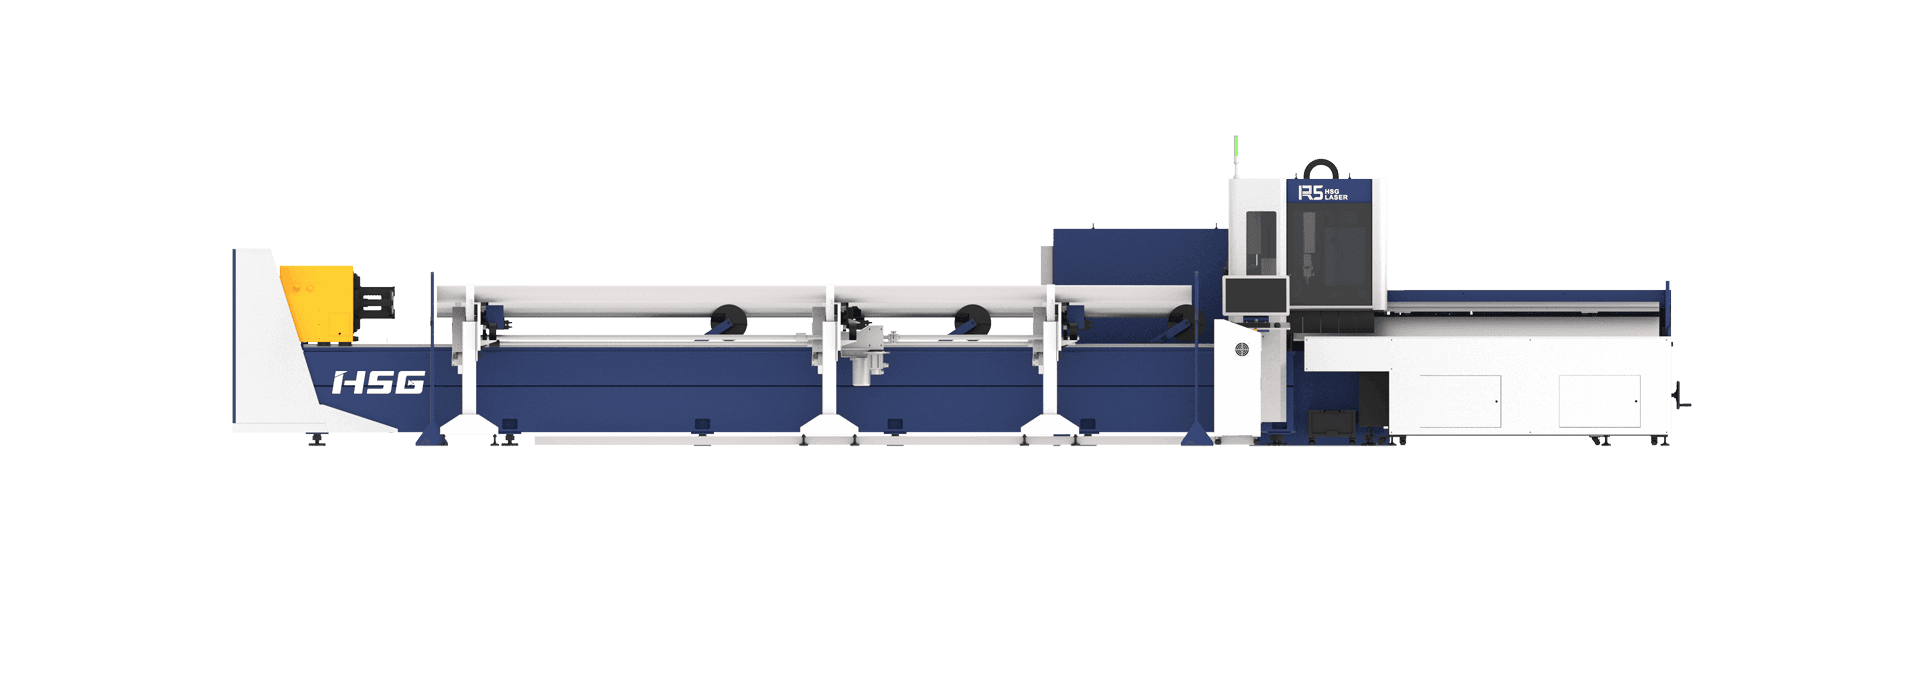 Product R5 Fully Automatic Tube Cutting Machine - HSG Thailand image